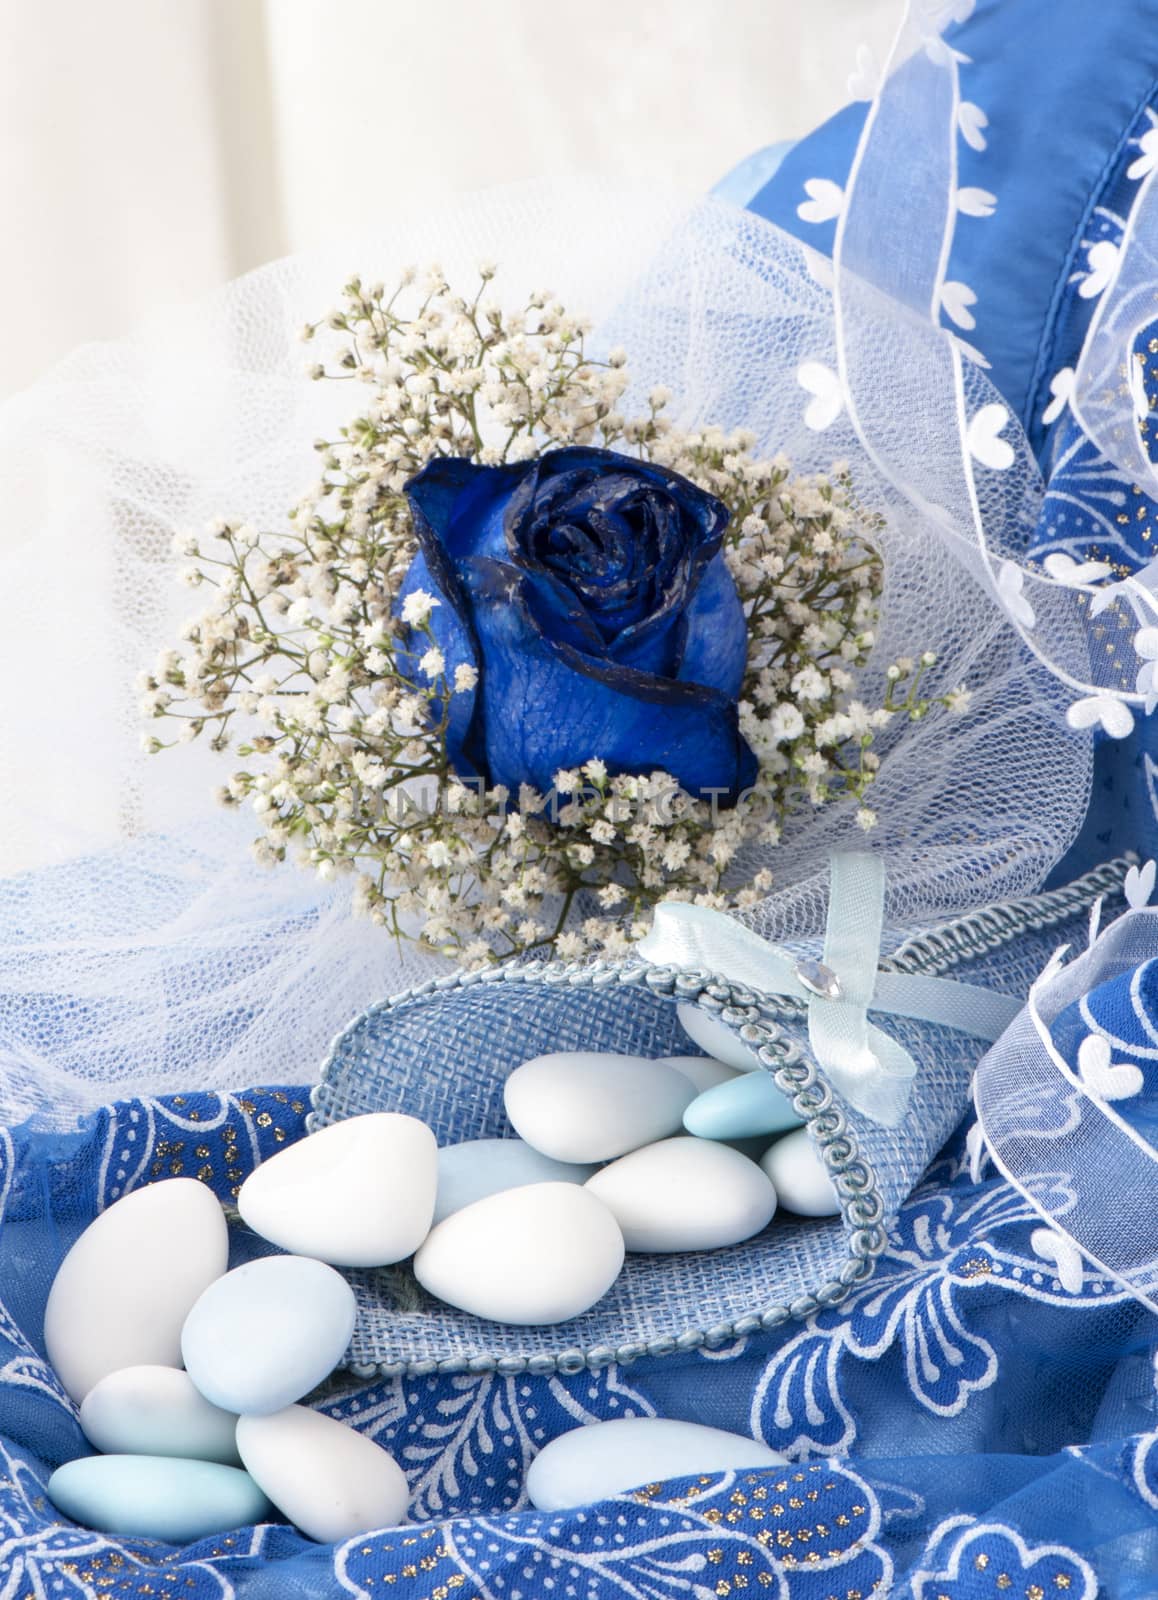 flowers candy and weddings favors on white background